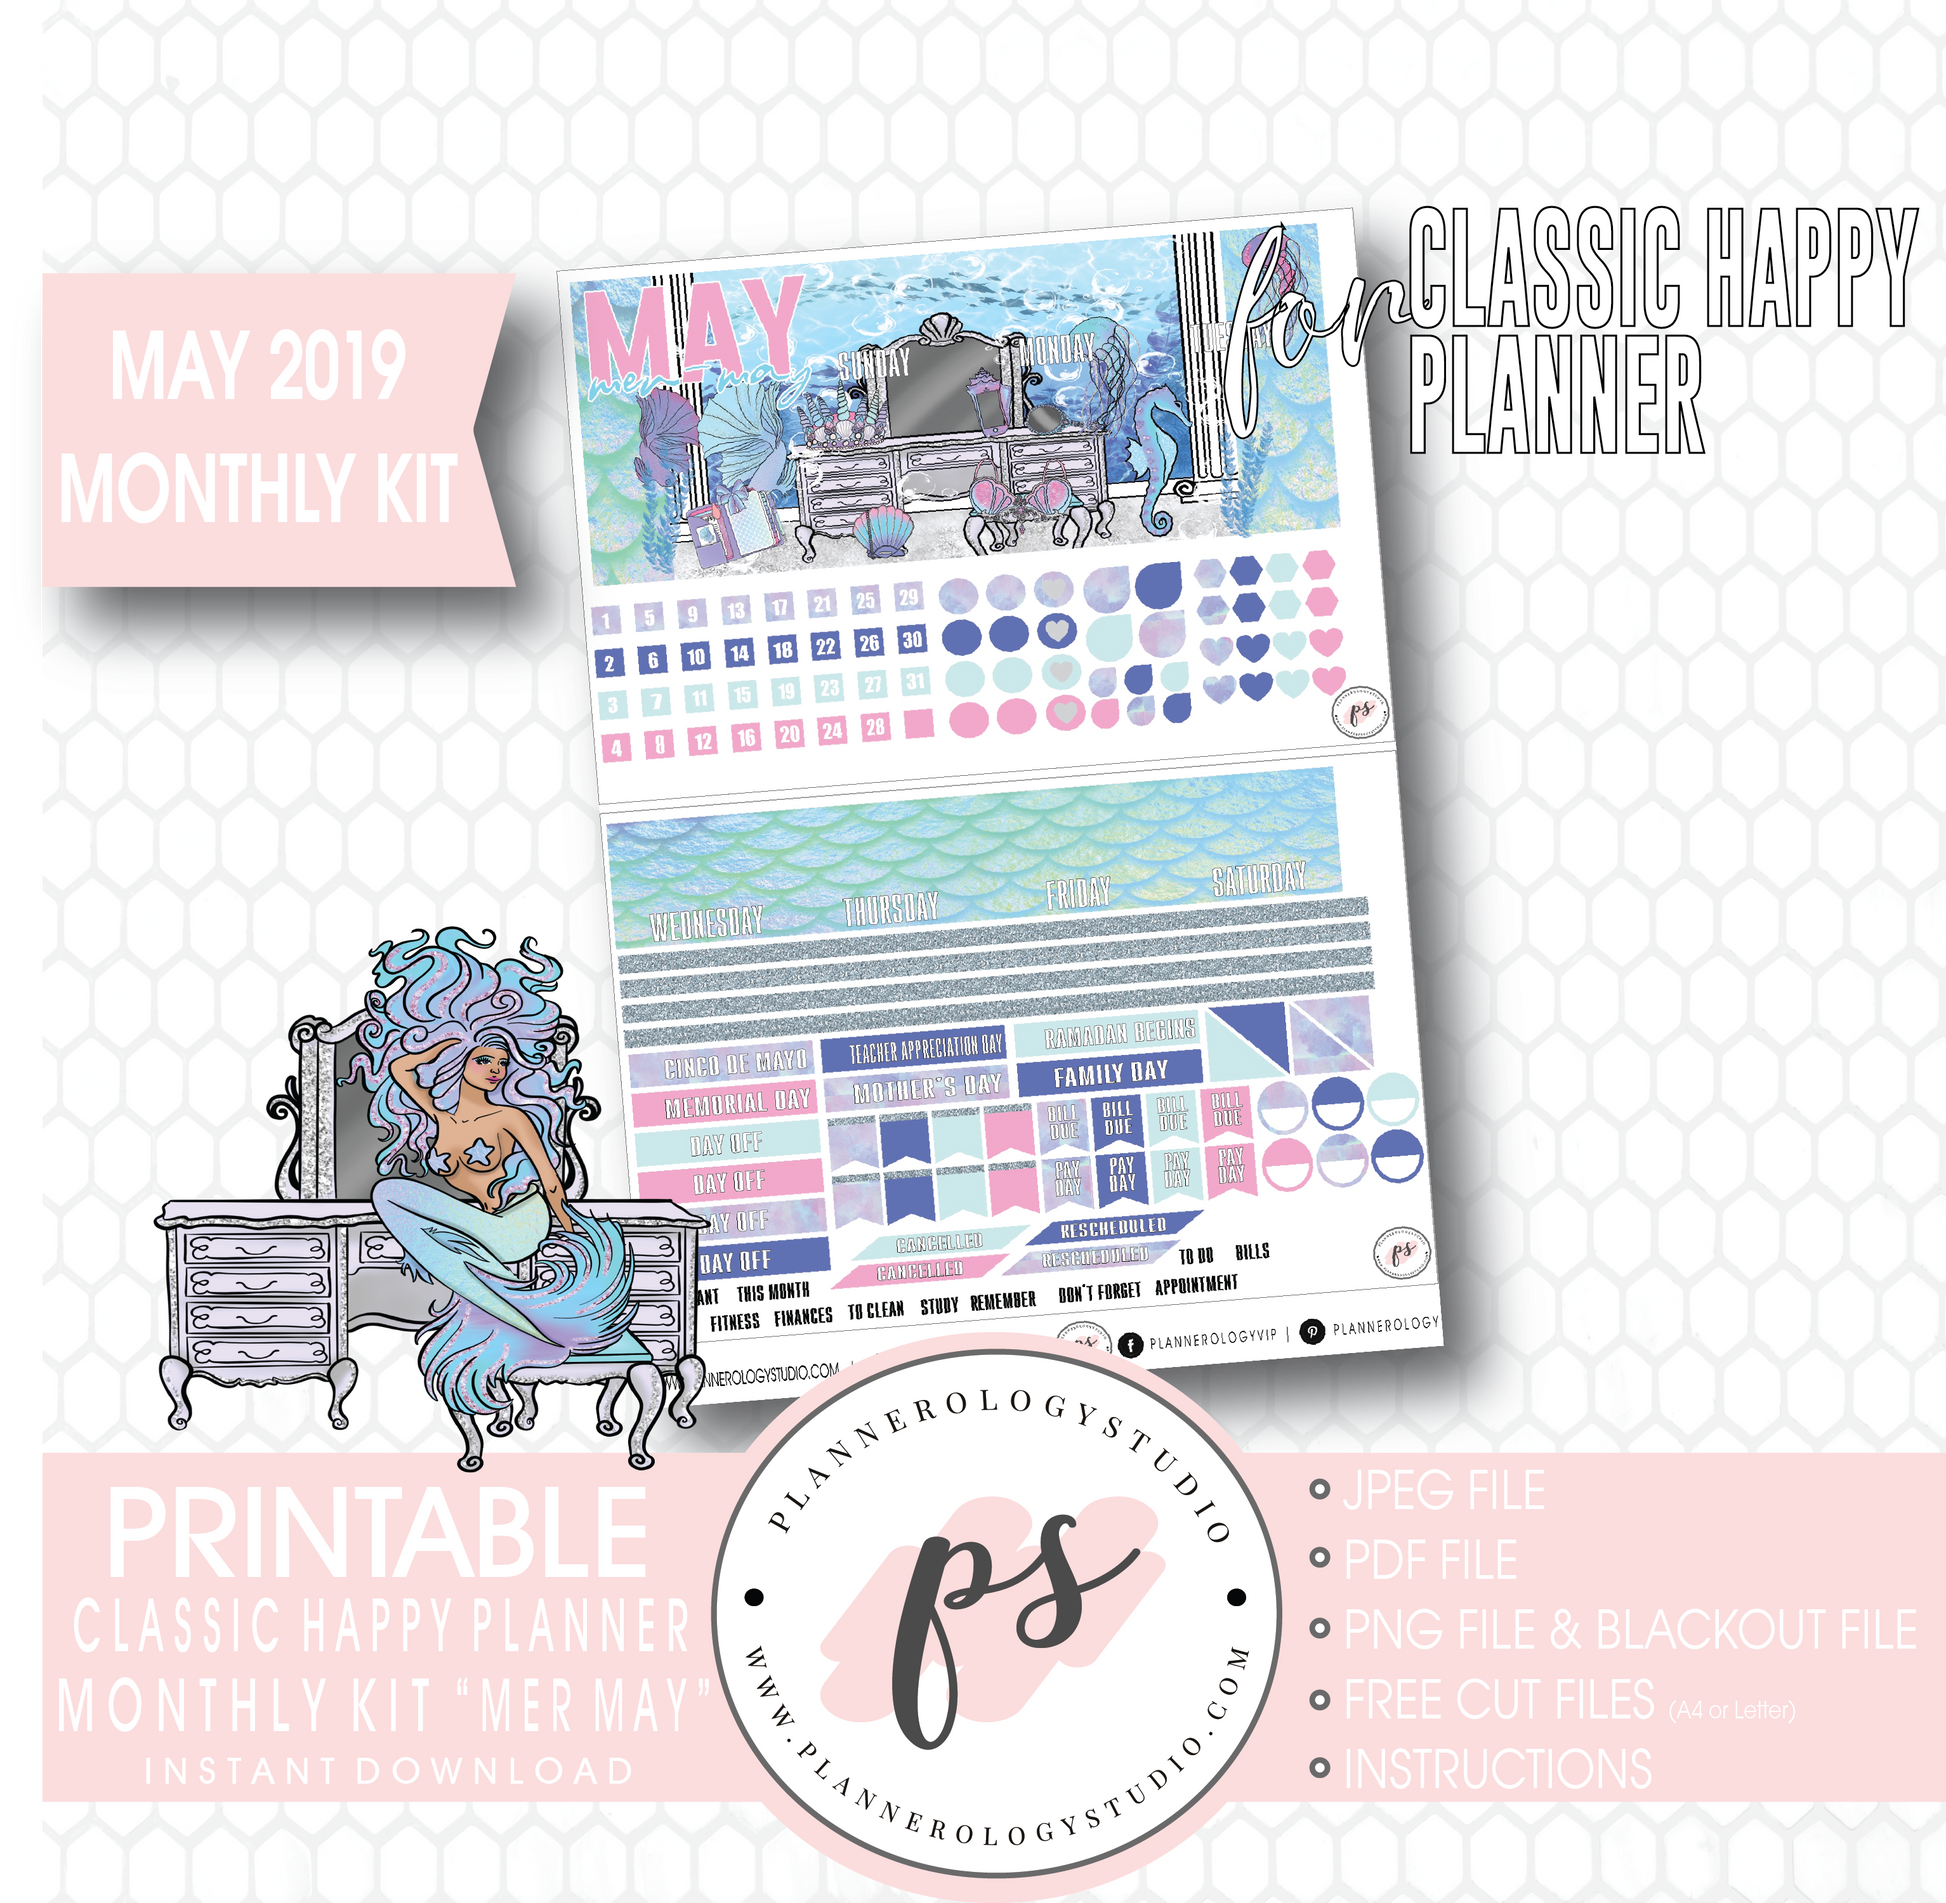 Mer-May May 2019 Monthly View Kit Digital Printable Planner Stickers (for use with Classic Happy Planner) - Plannerologystudio